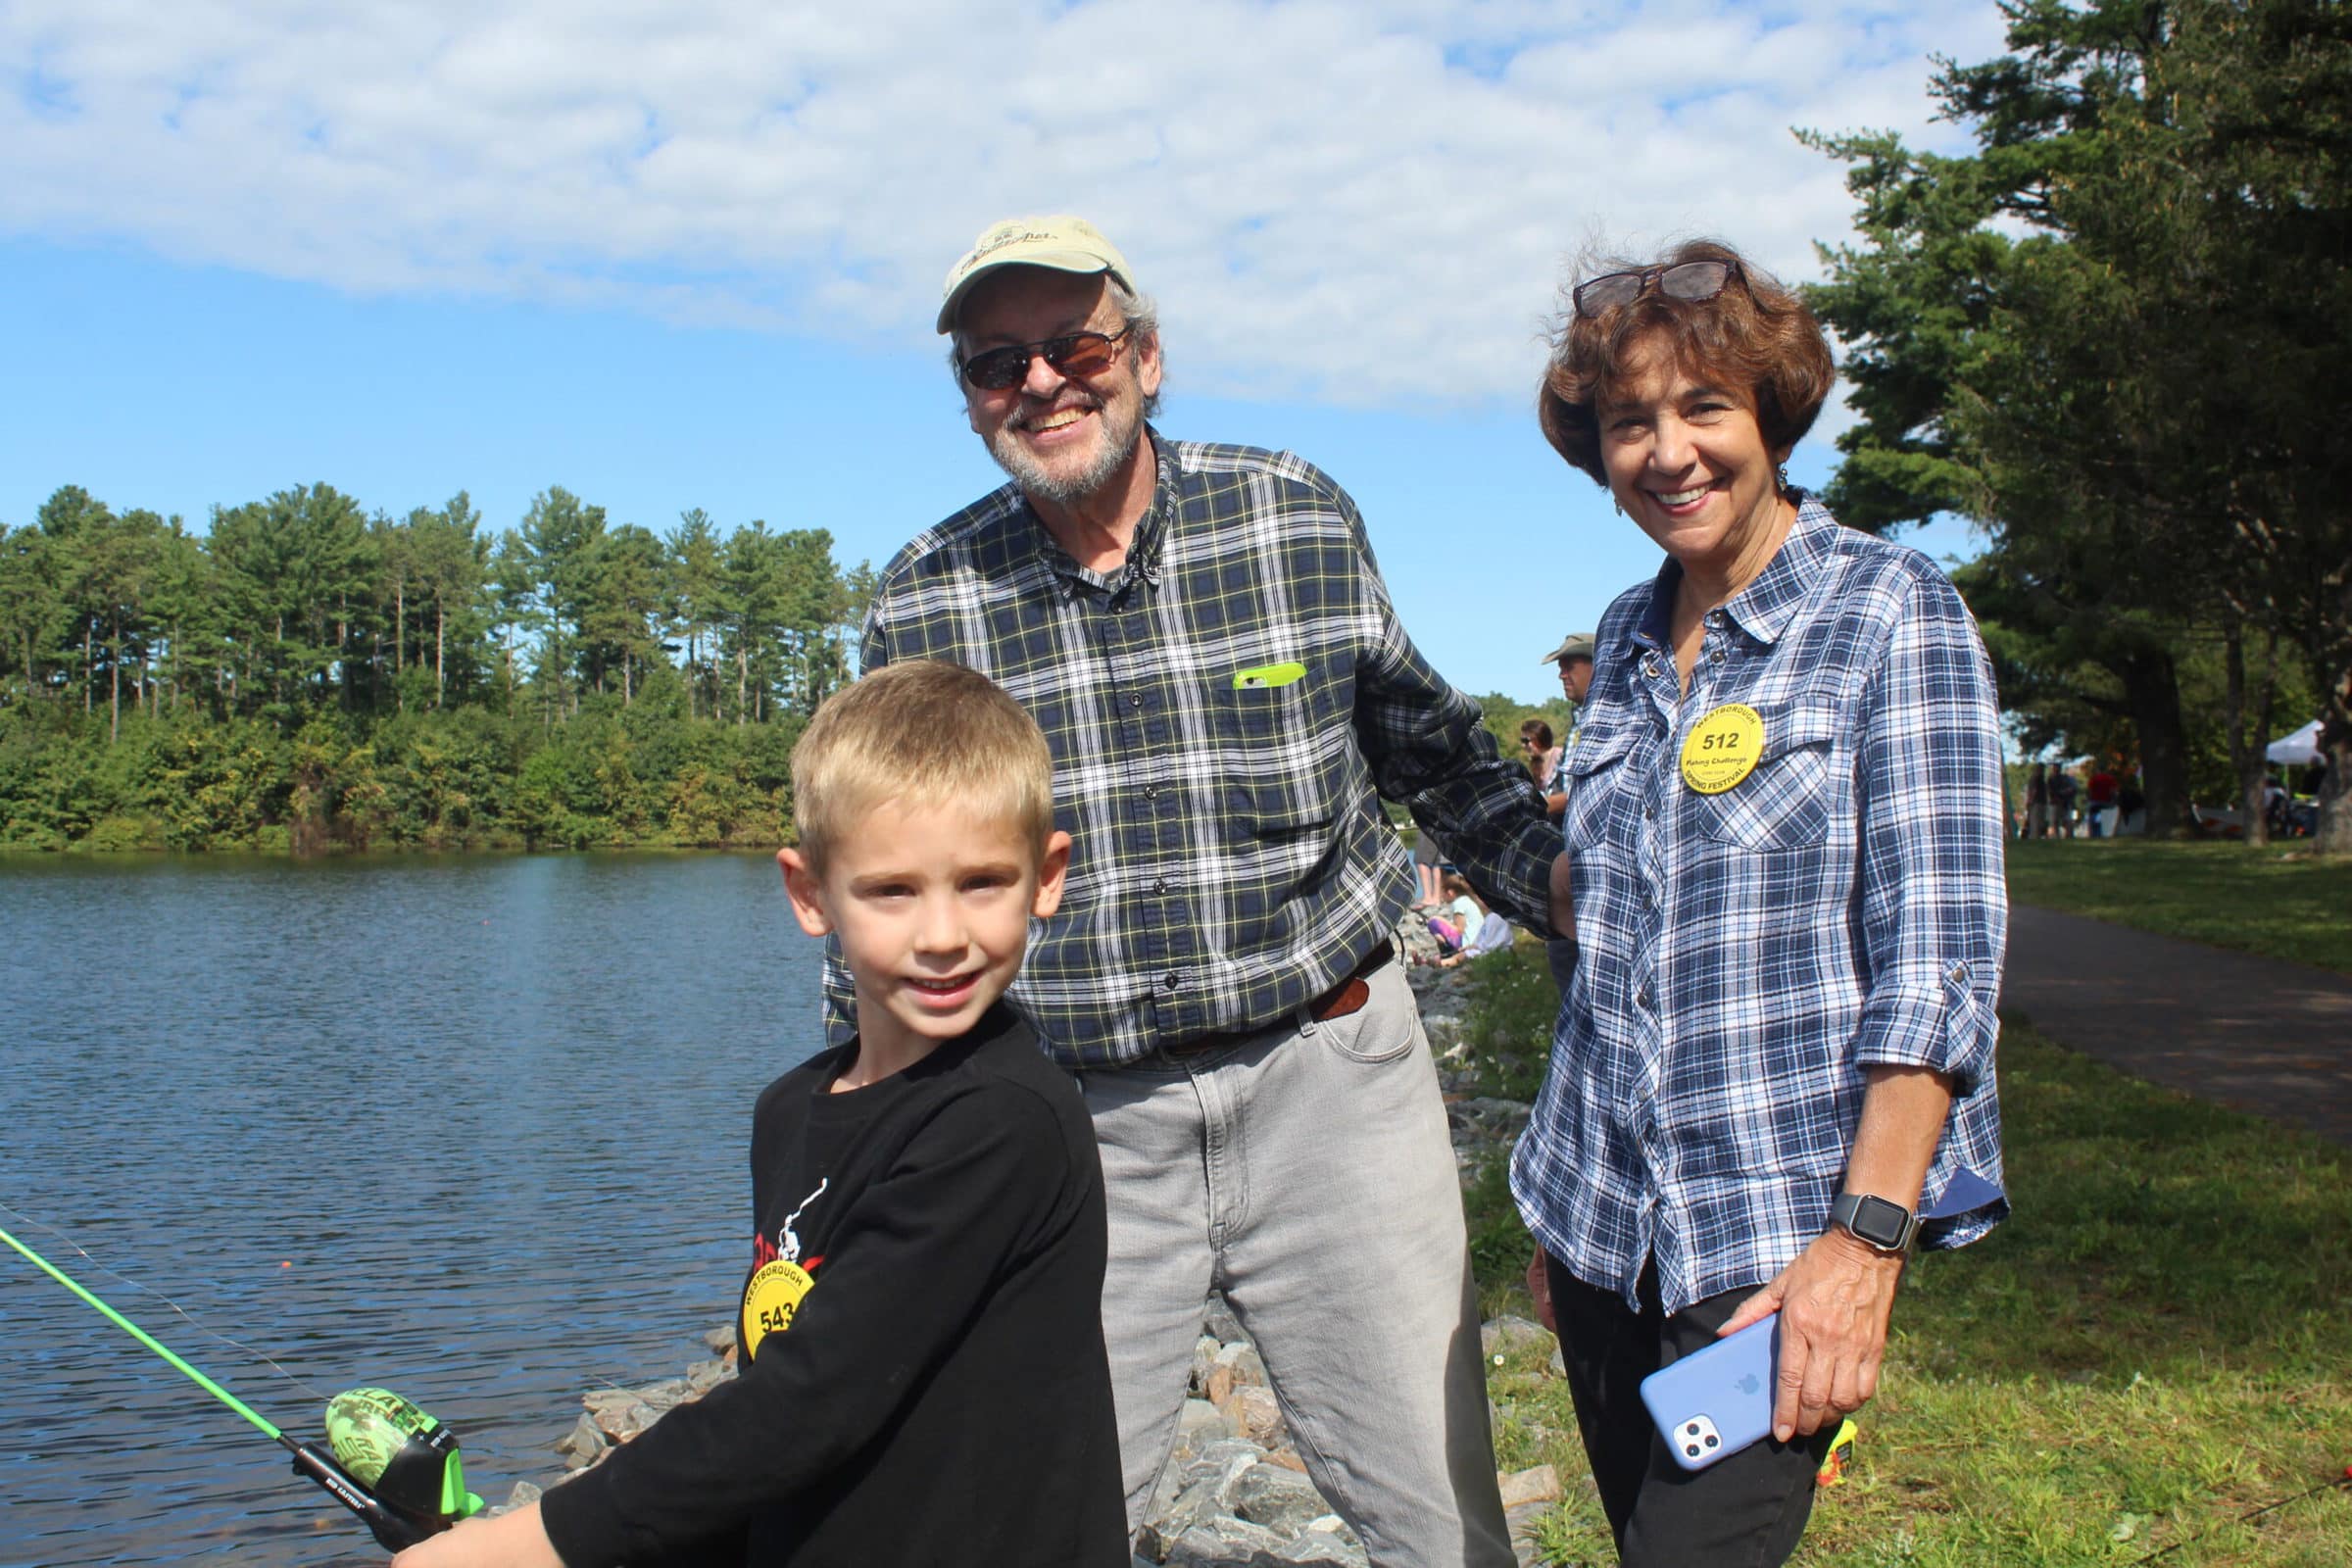 Donna and Bill Bickel joined their grandson, Owen, at the fishing challenge.